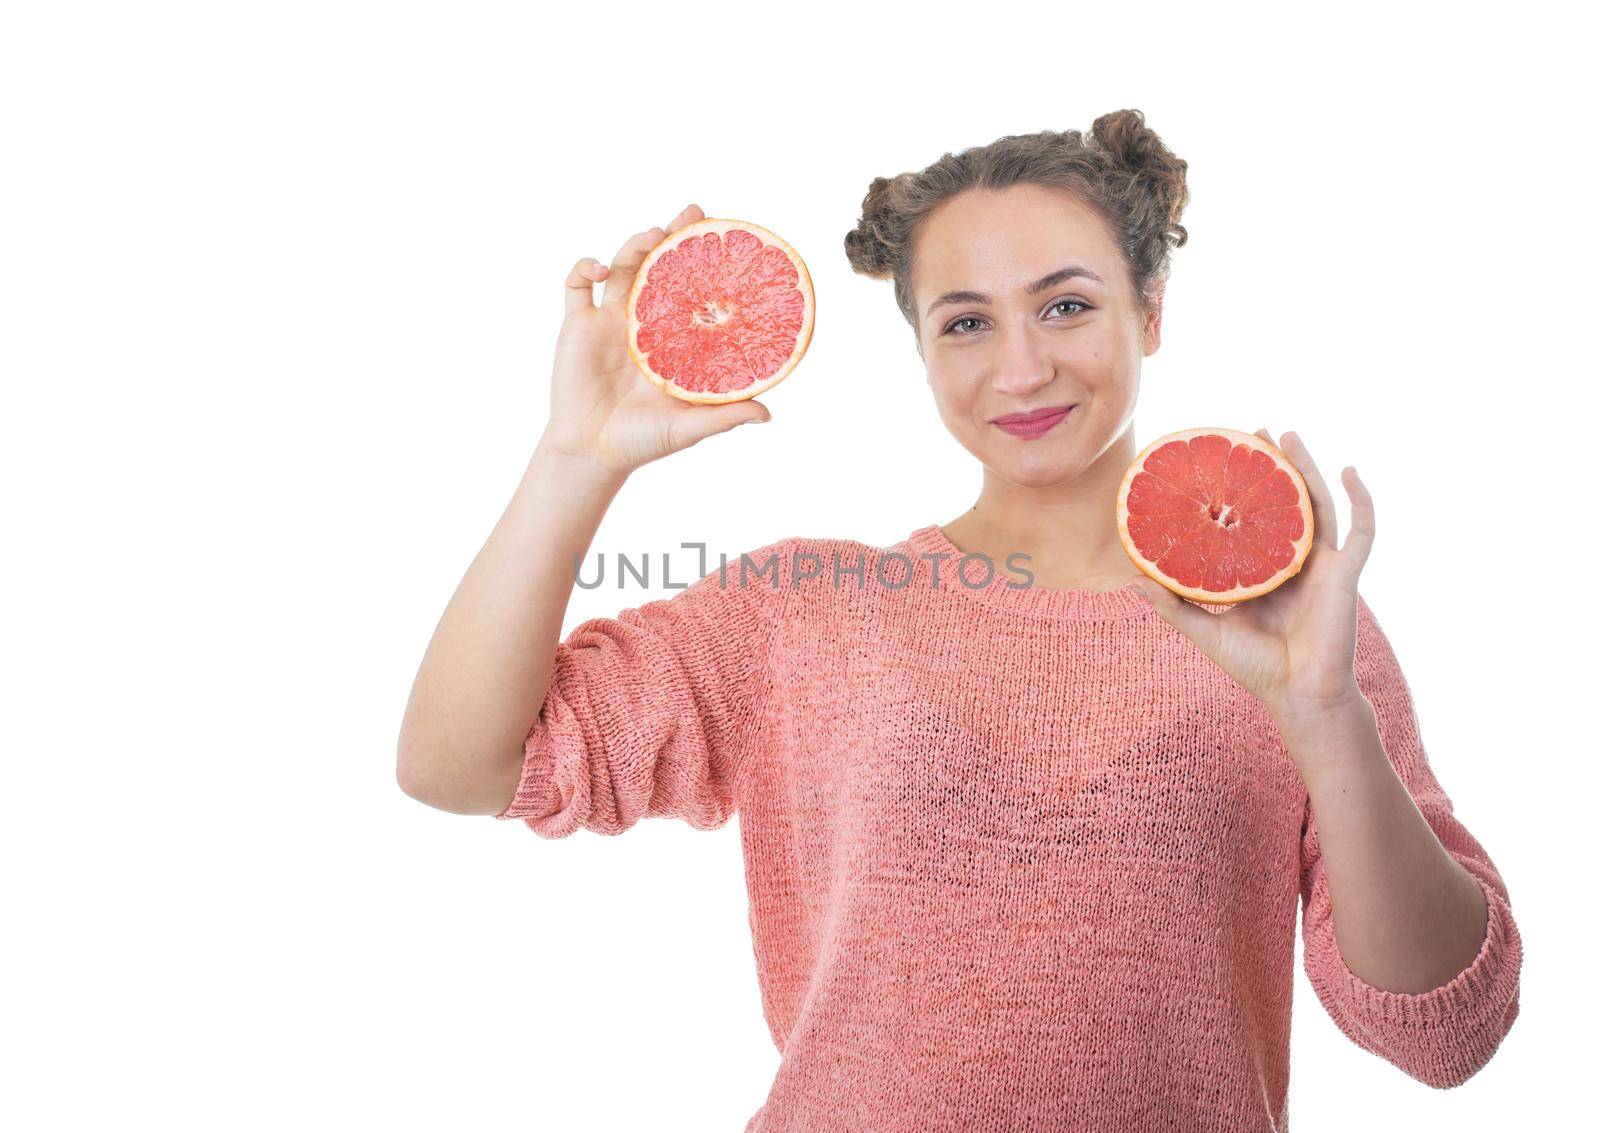 young girl holding fresh grapefruits on a white background by aprilphoto